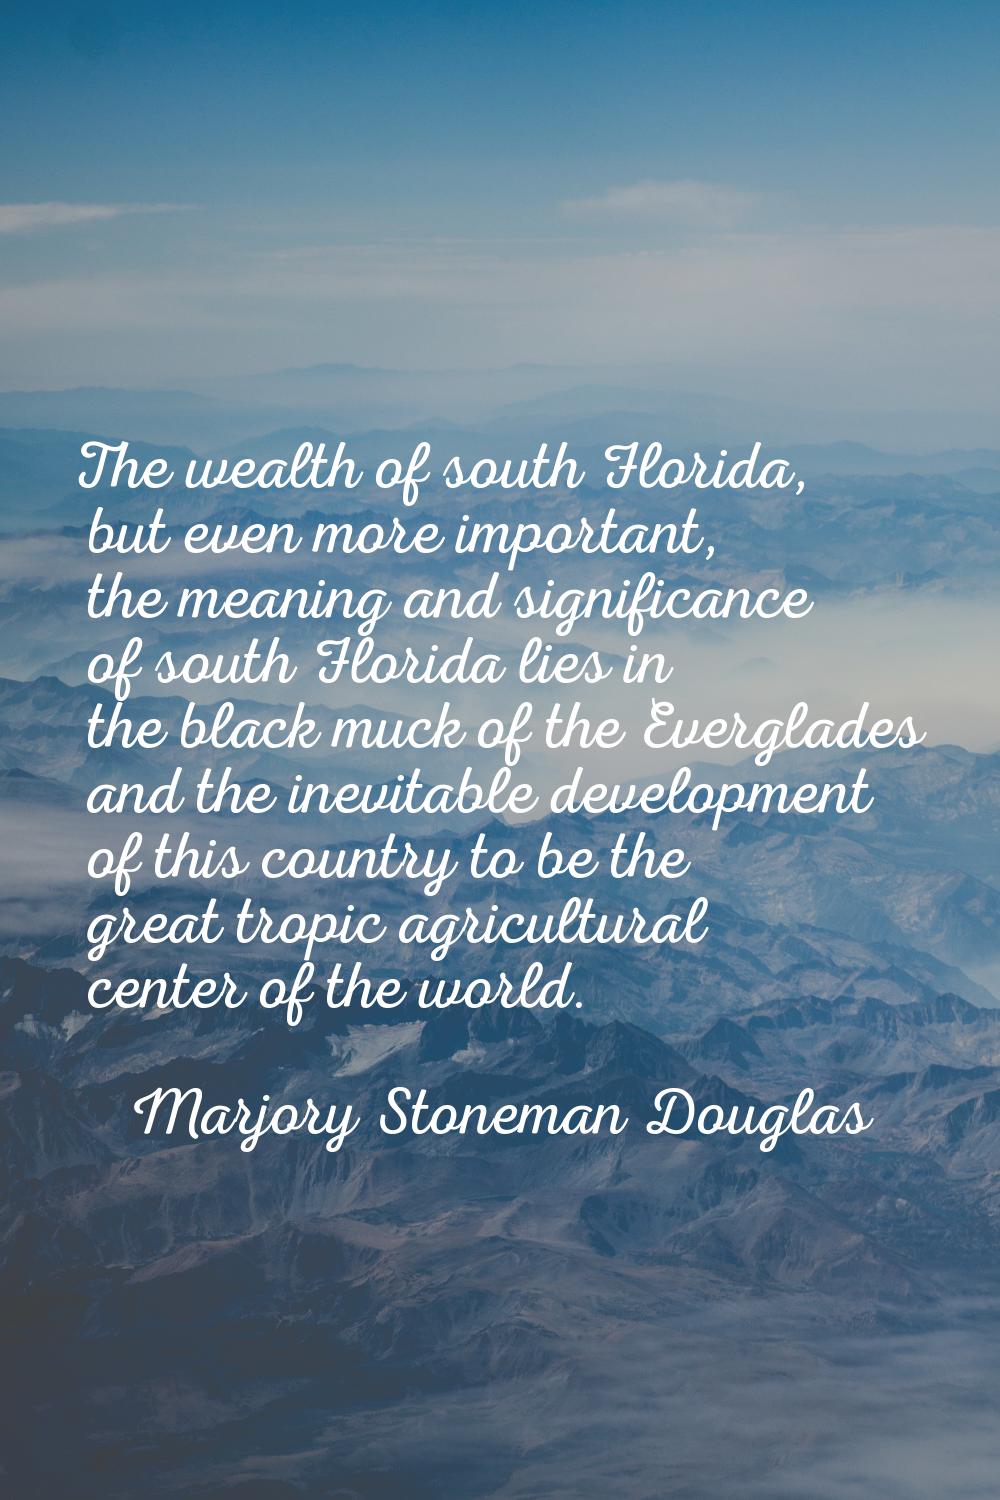 The wealth of south Florida, but even more important, the meaning and significance of south Florida